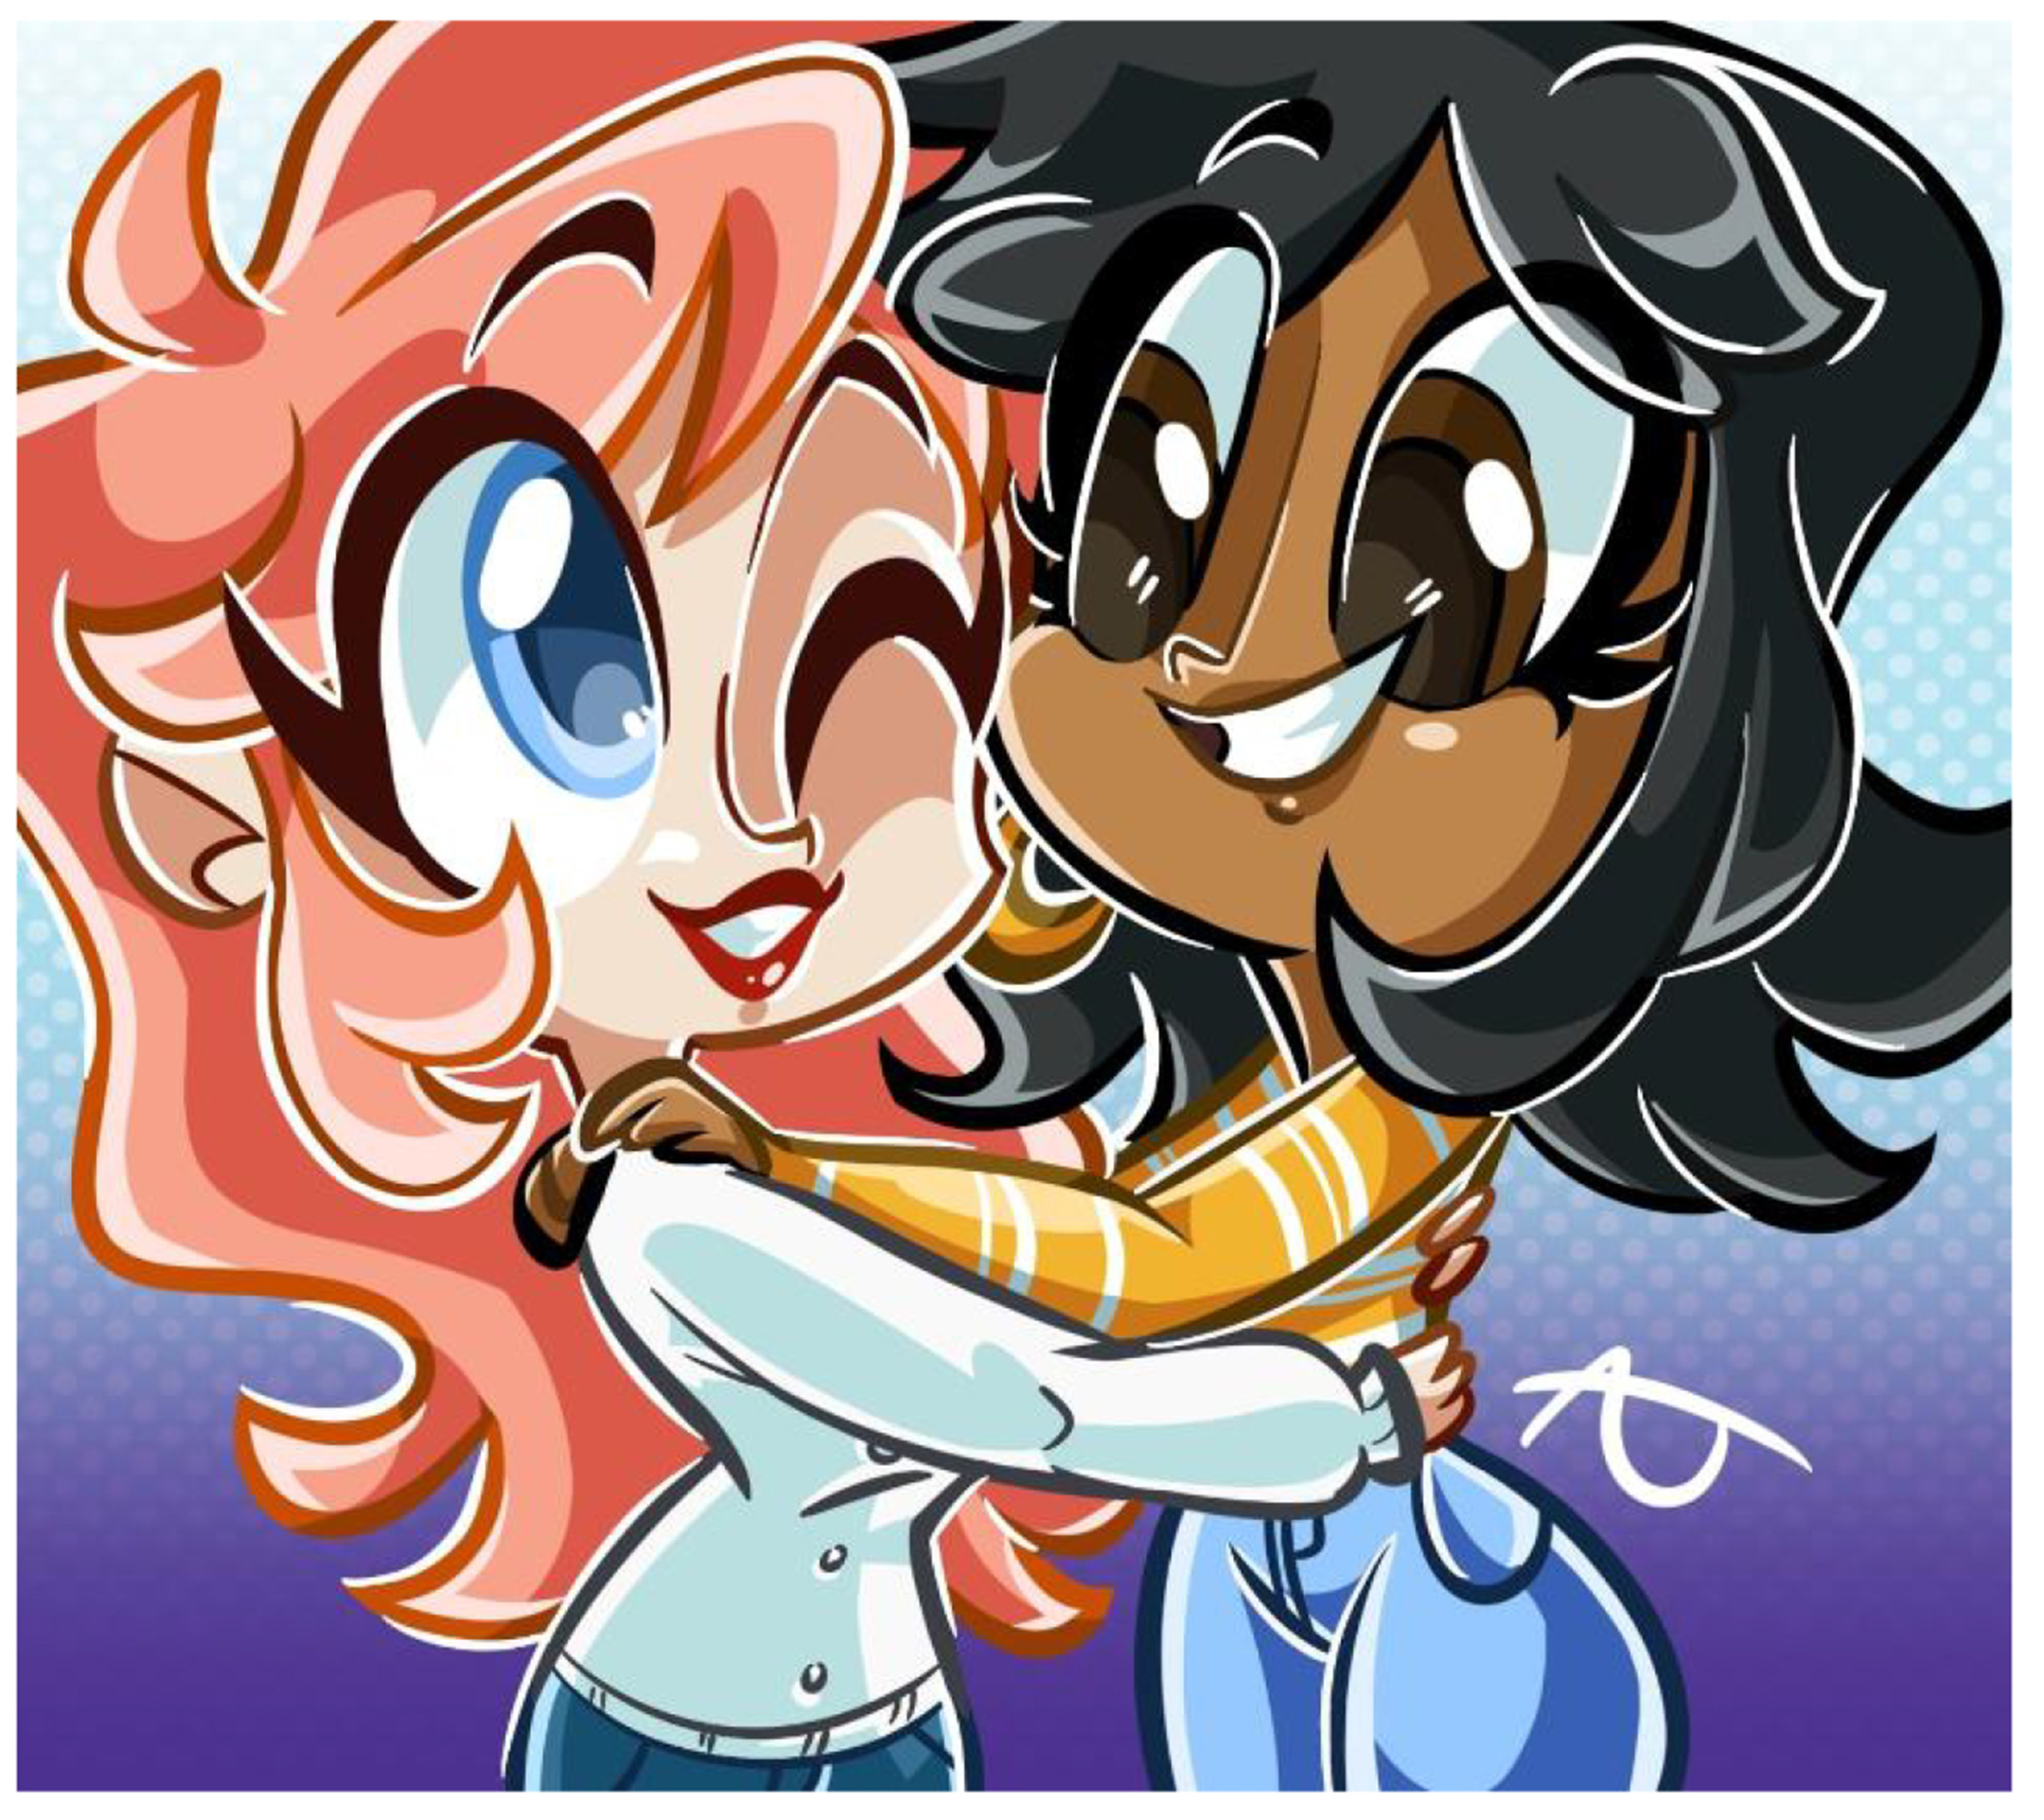 Cartoony illustration of a young black woman and young white woman smiling as they embrace